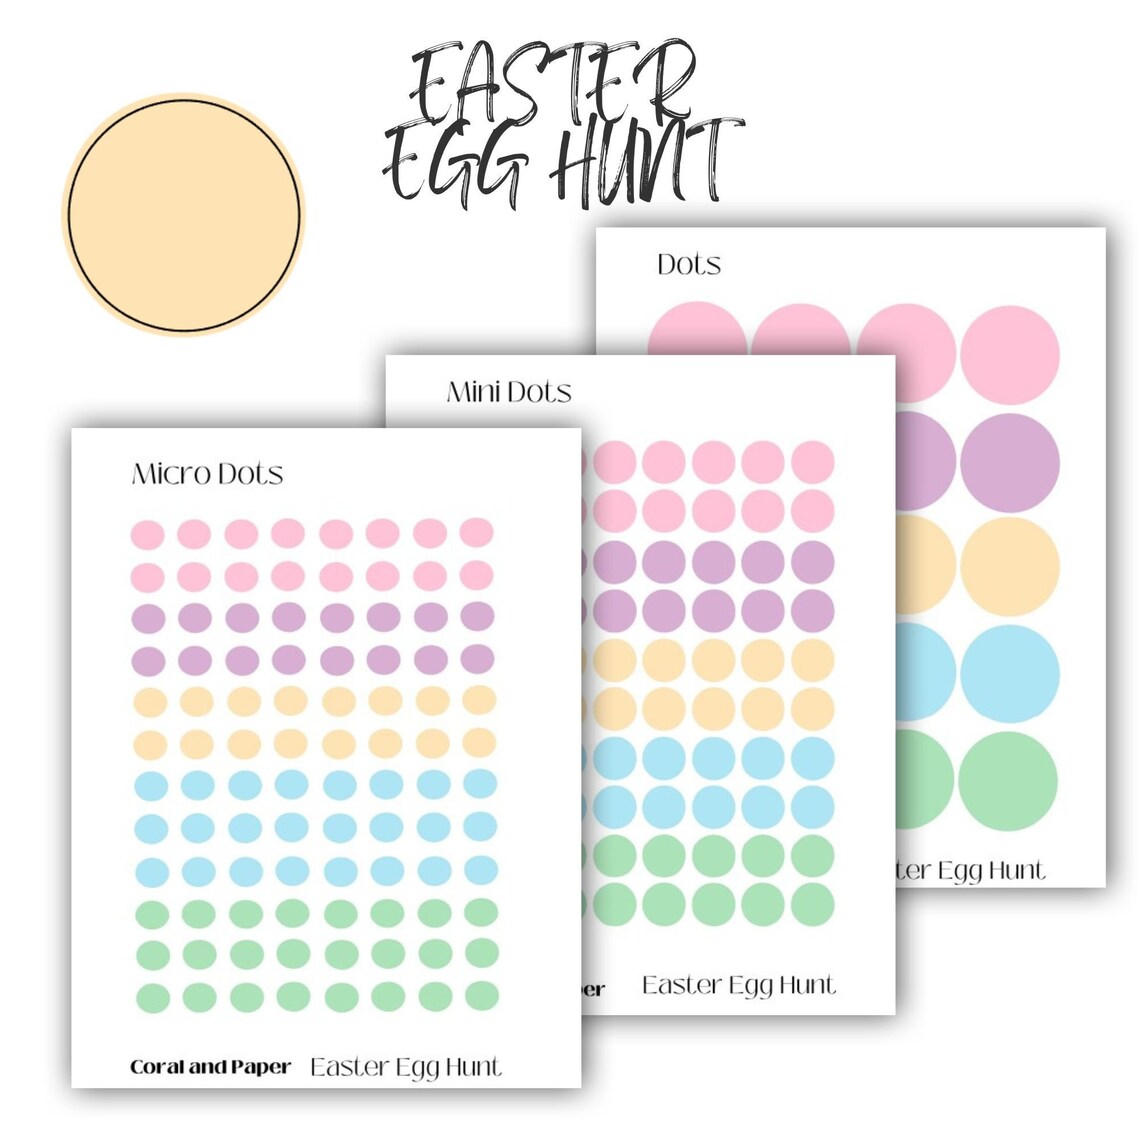 EASTER EGG HUNT - Planner Stickers | Functional Stickers | Minimalist Planning